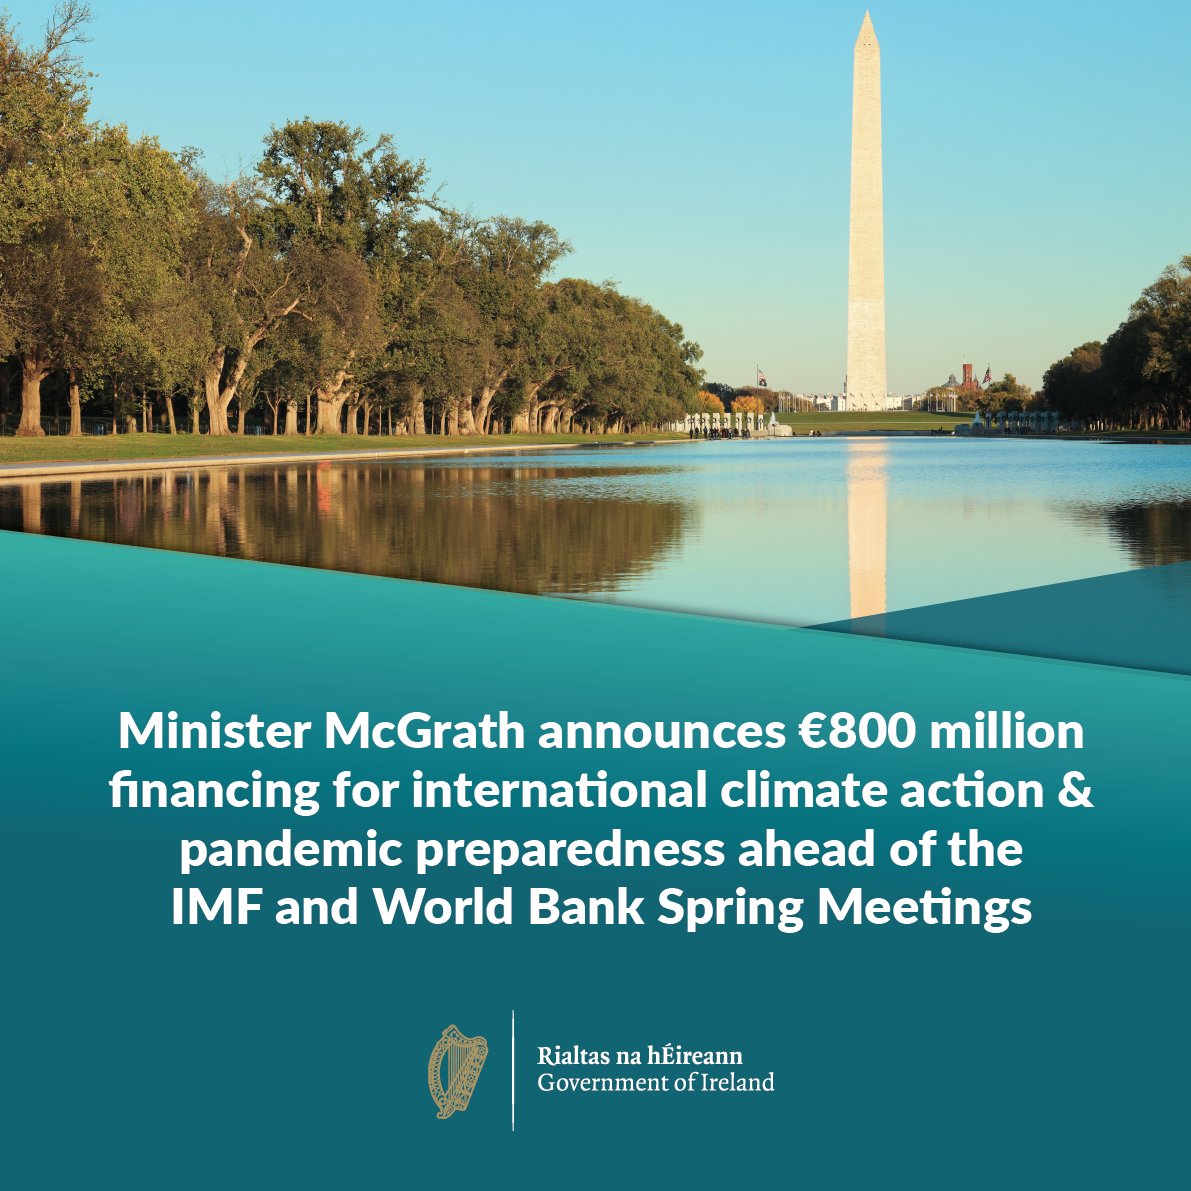 Minister @mmcgrathtd travels to Washington D.C. today for the Spring Meetings of the IMF & World Bank, having secured Government approval at Cabinet to provide €800 million in financing for international climate action & pandemic preparedness. Read more: gov.ie/en/press-relea…